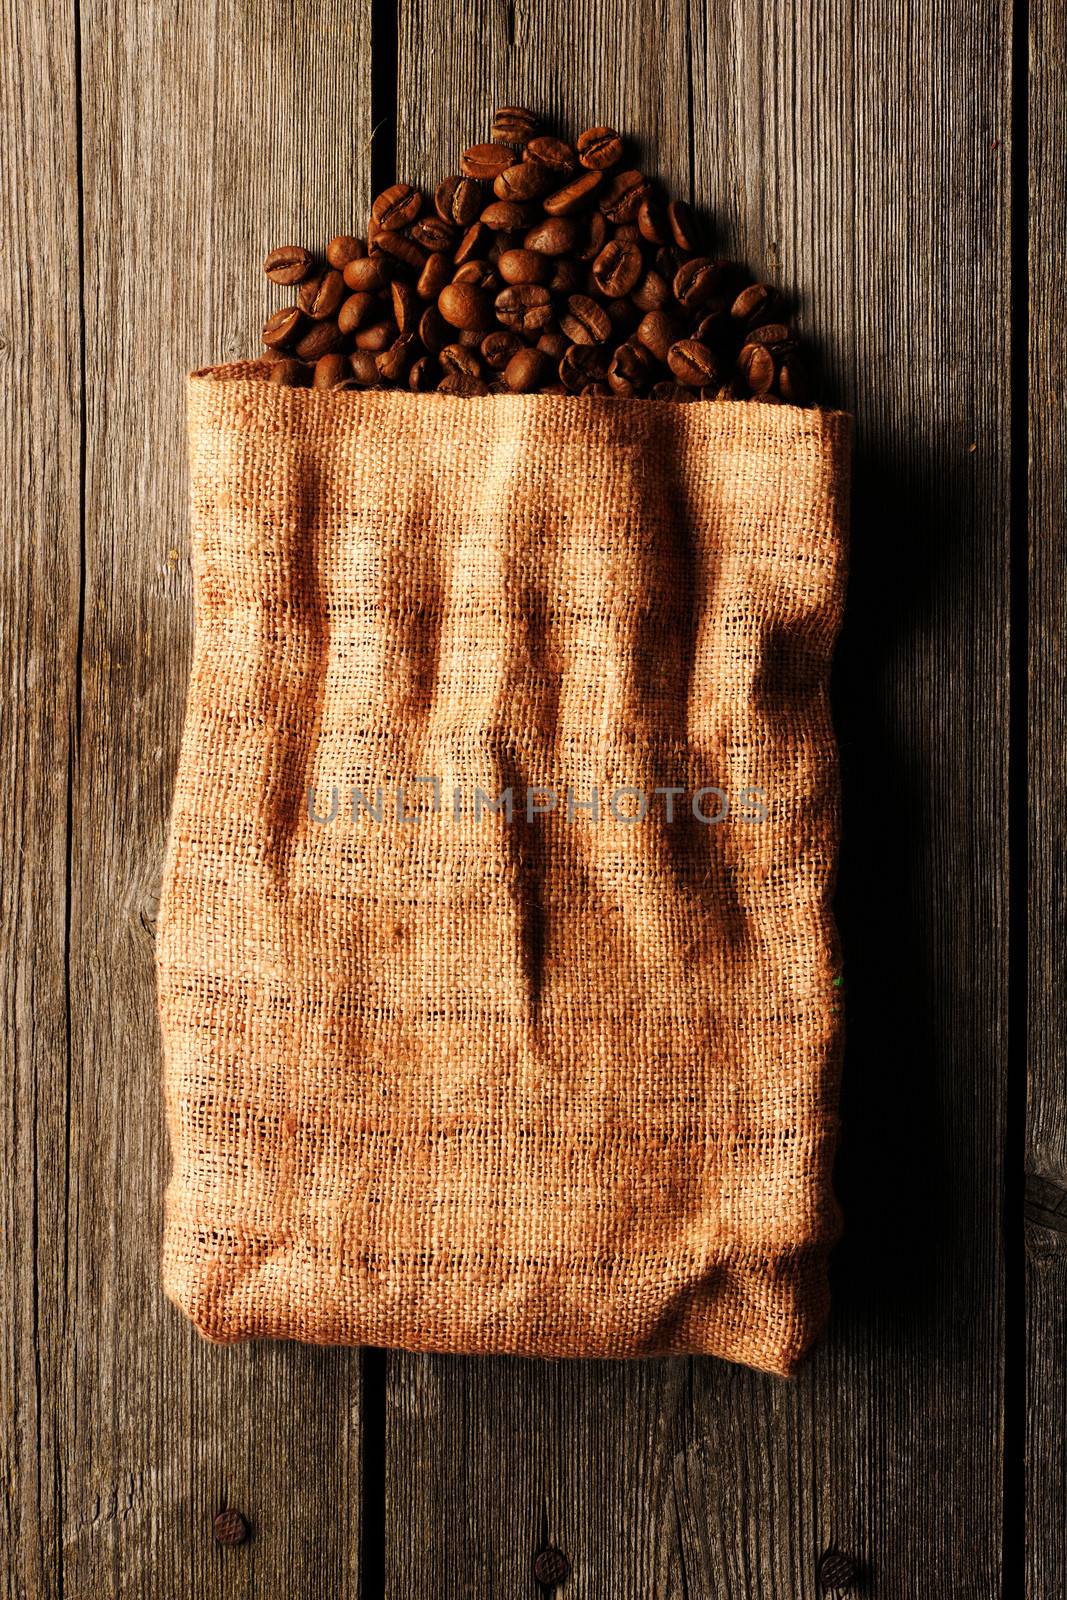 Coffee beans in bag over wooden background